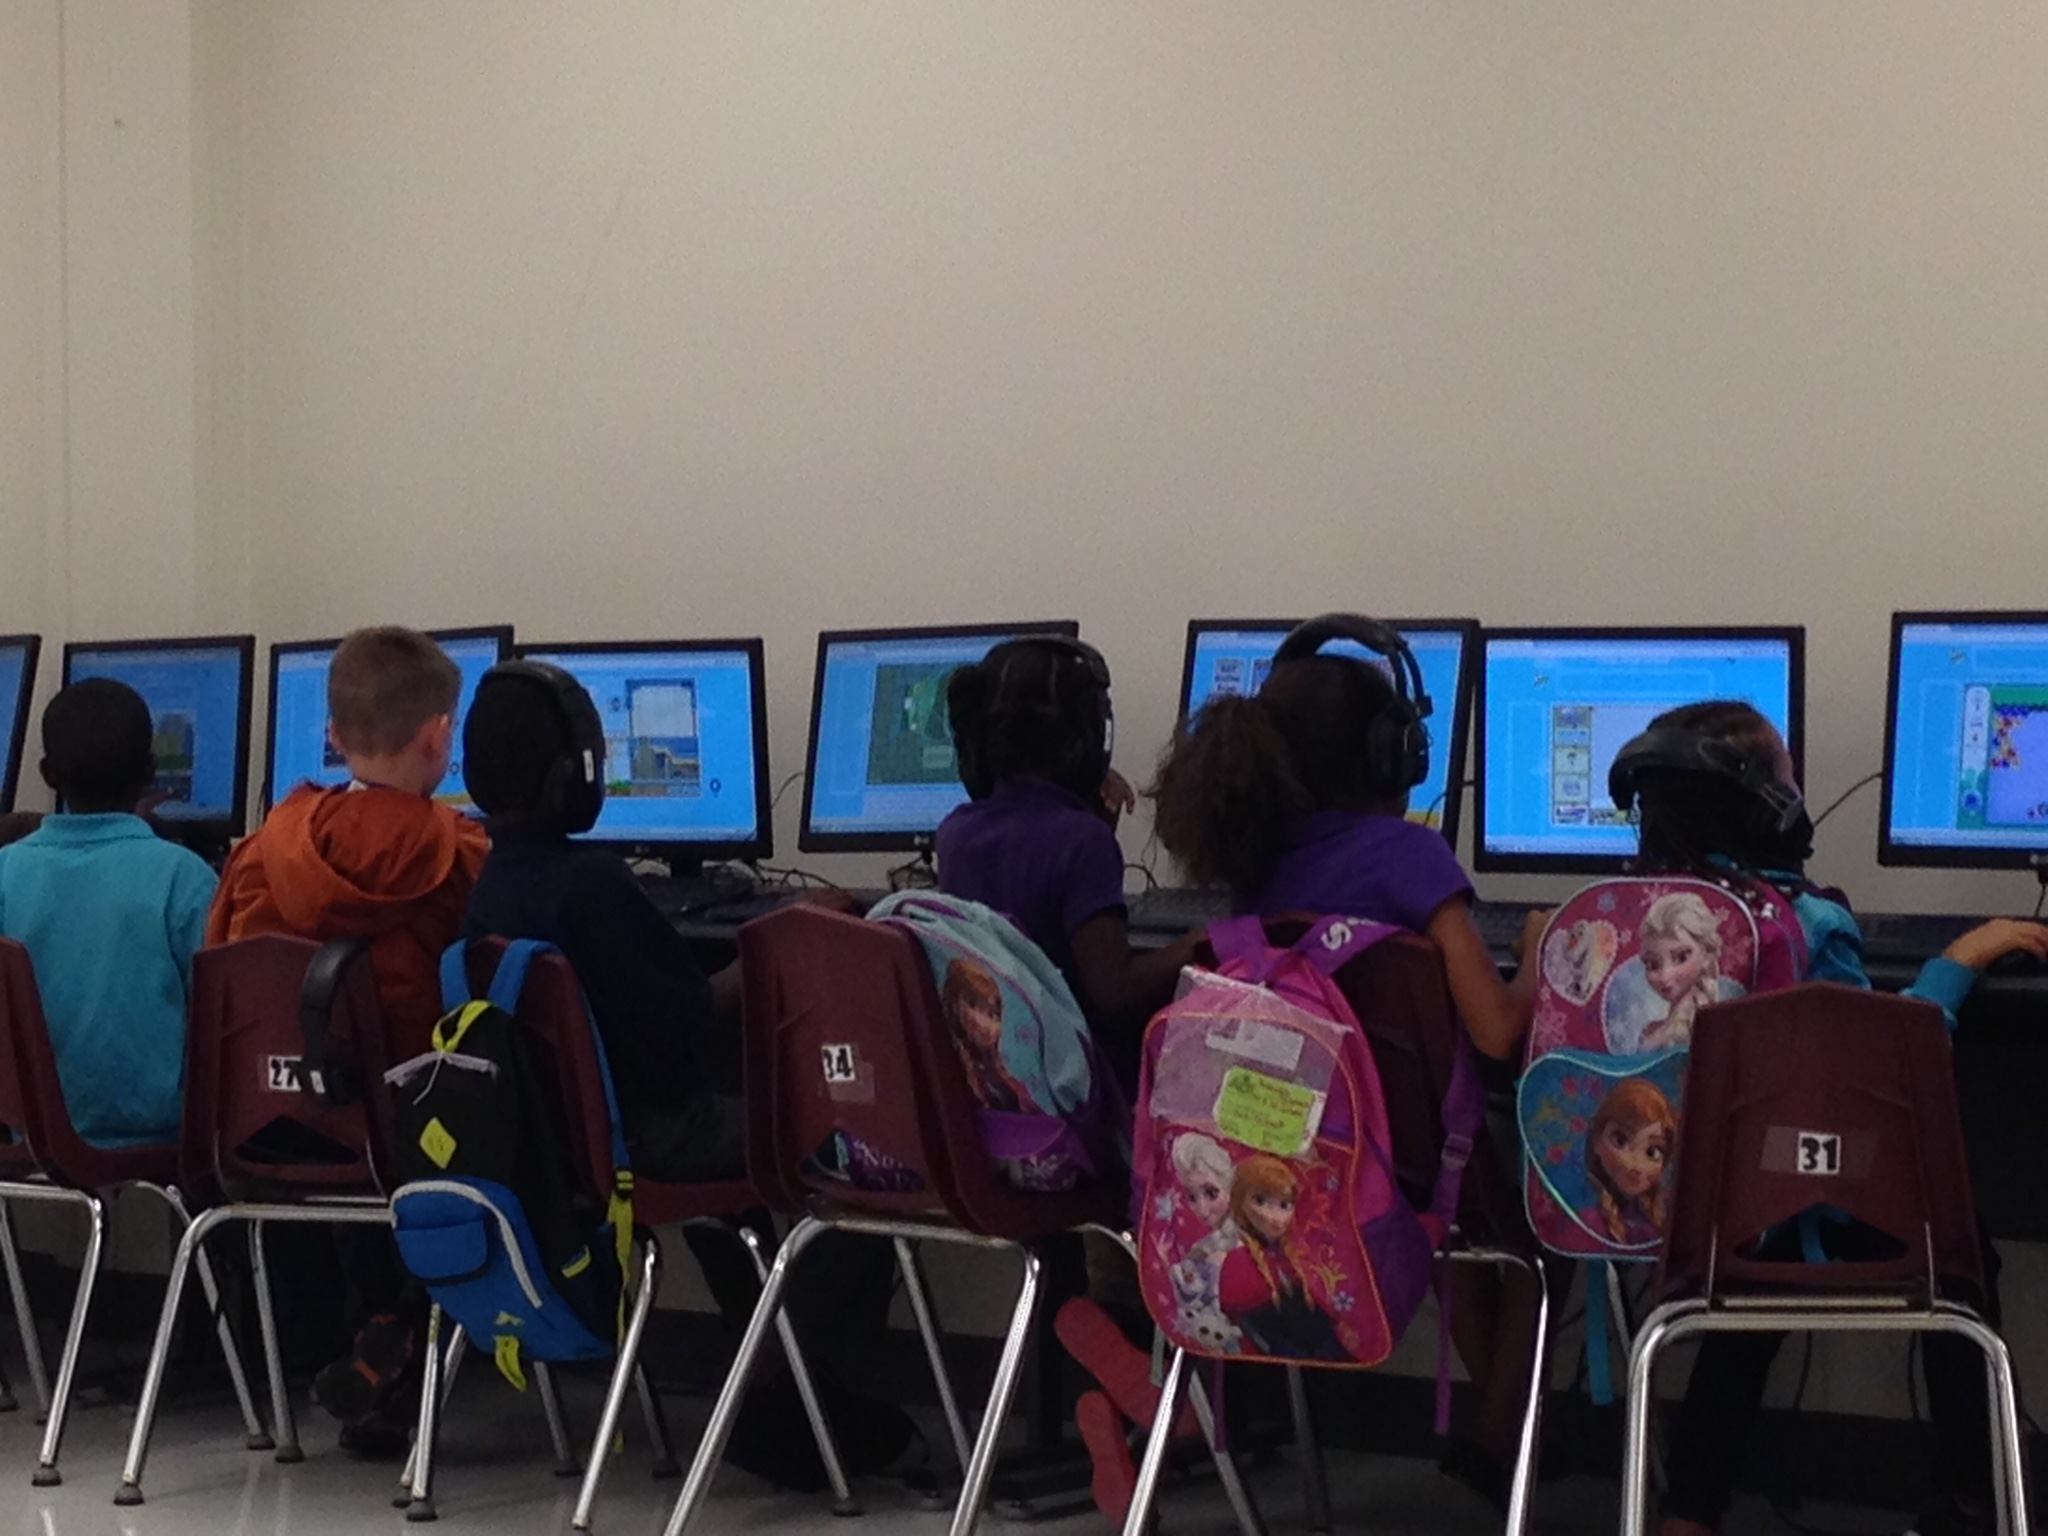 Using technology in the classroom